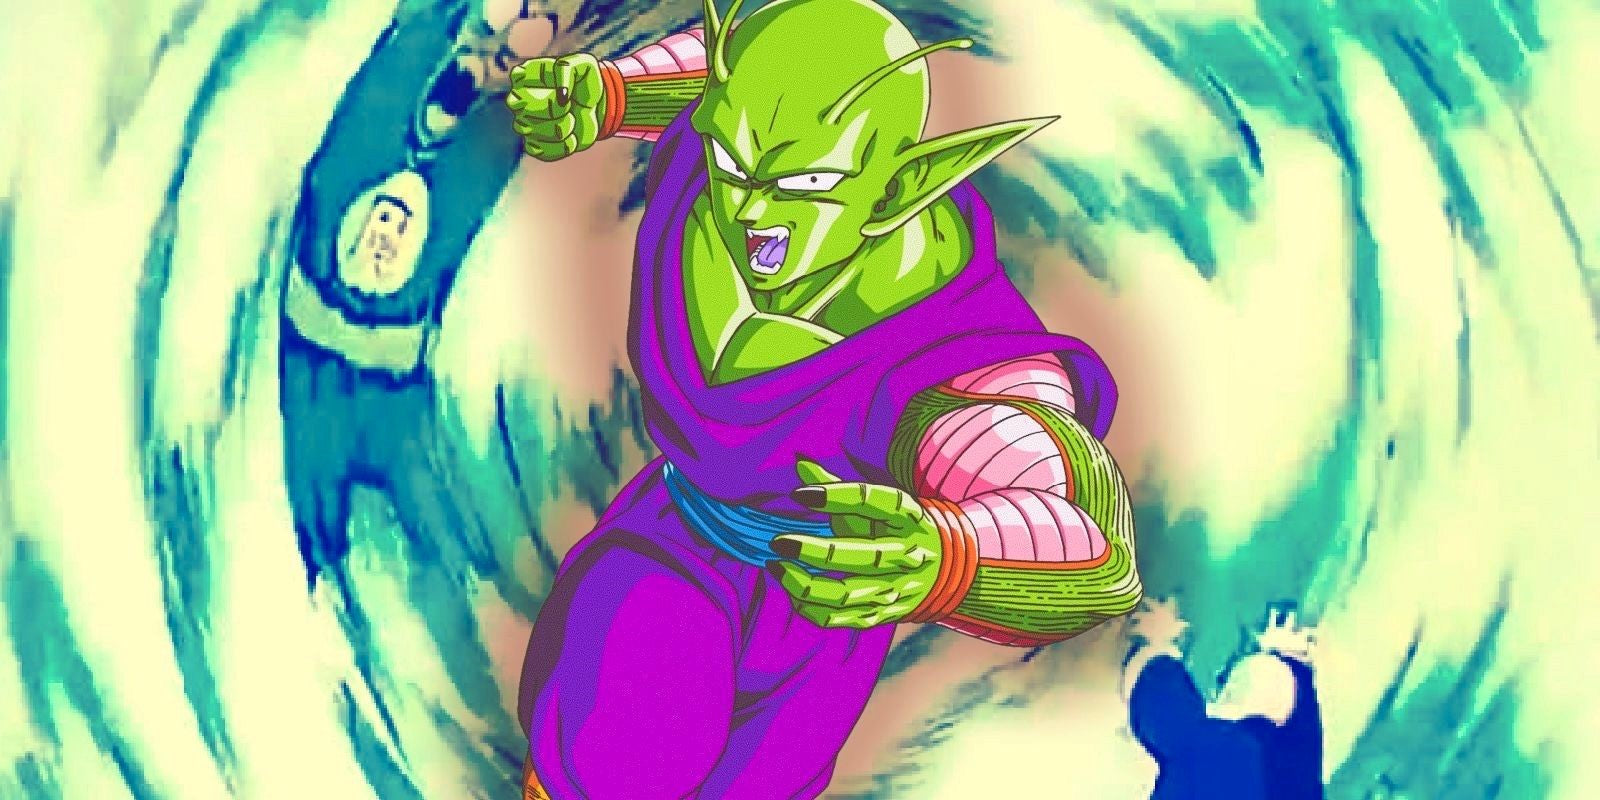 THE EVILLEST THINGS PICCOLO EVER DID